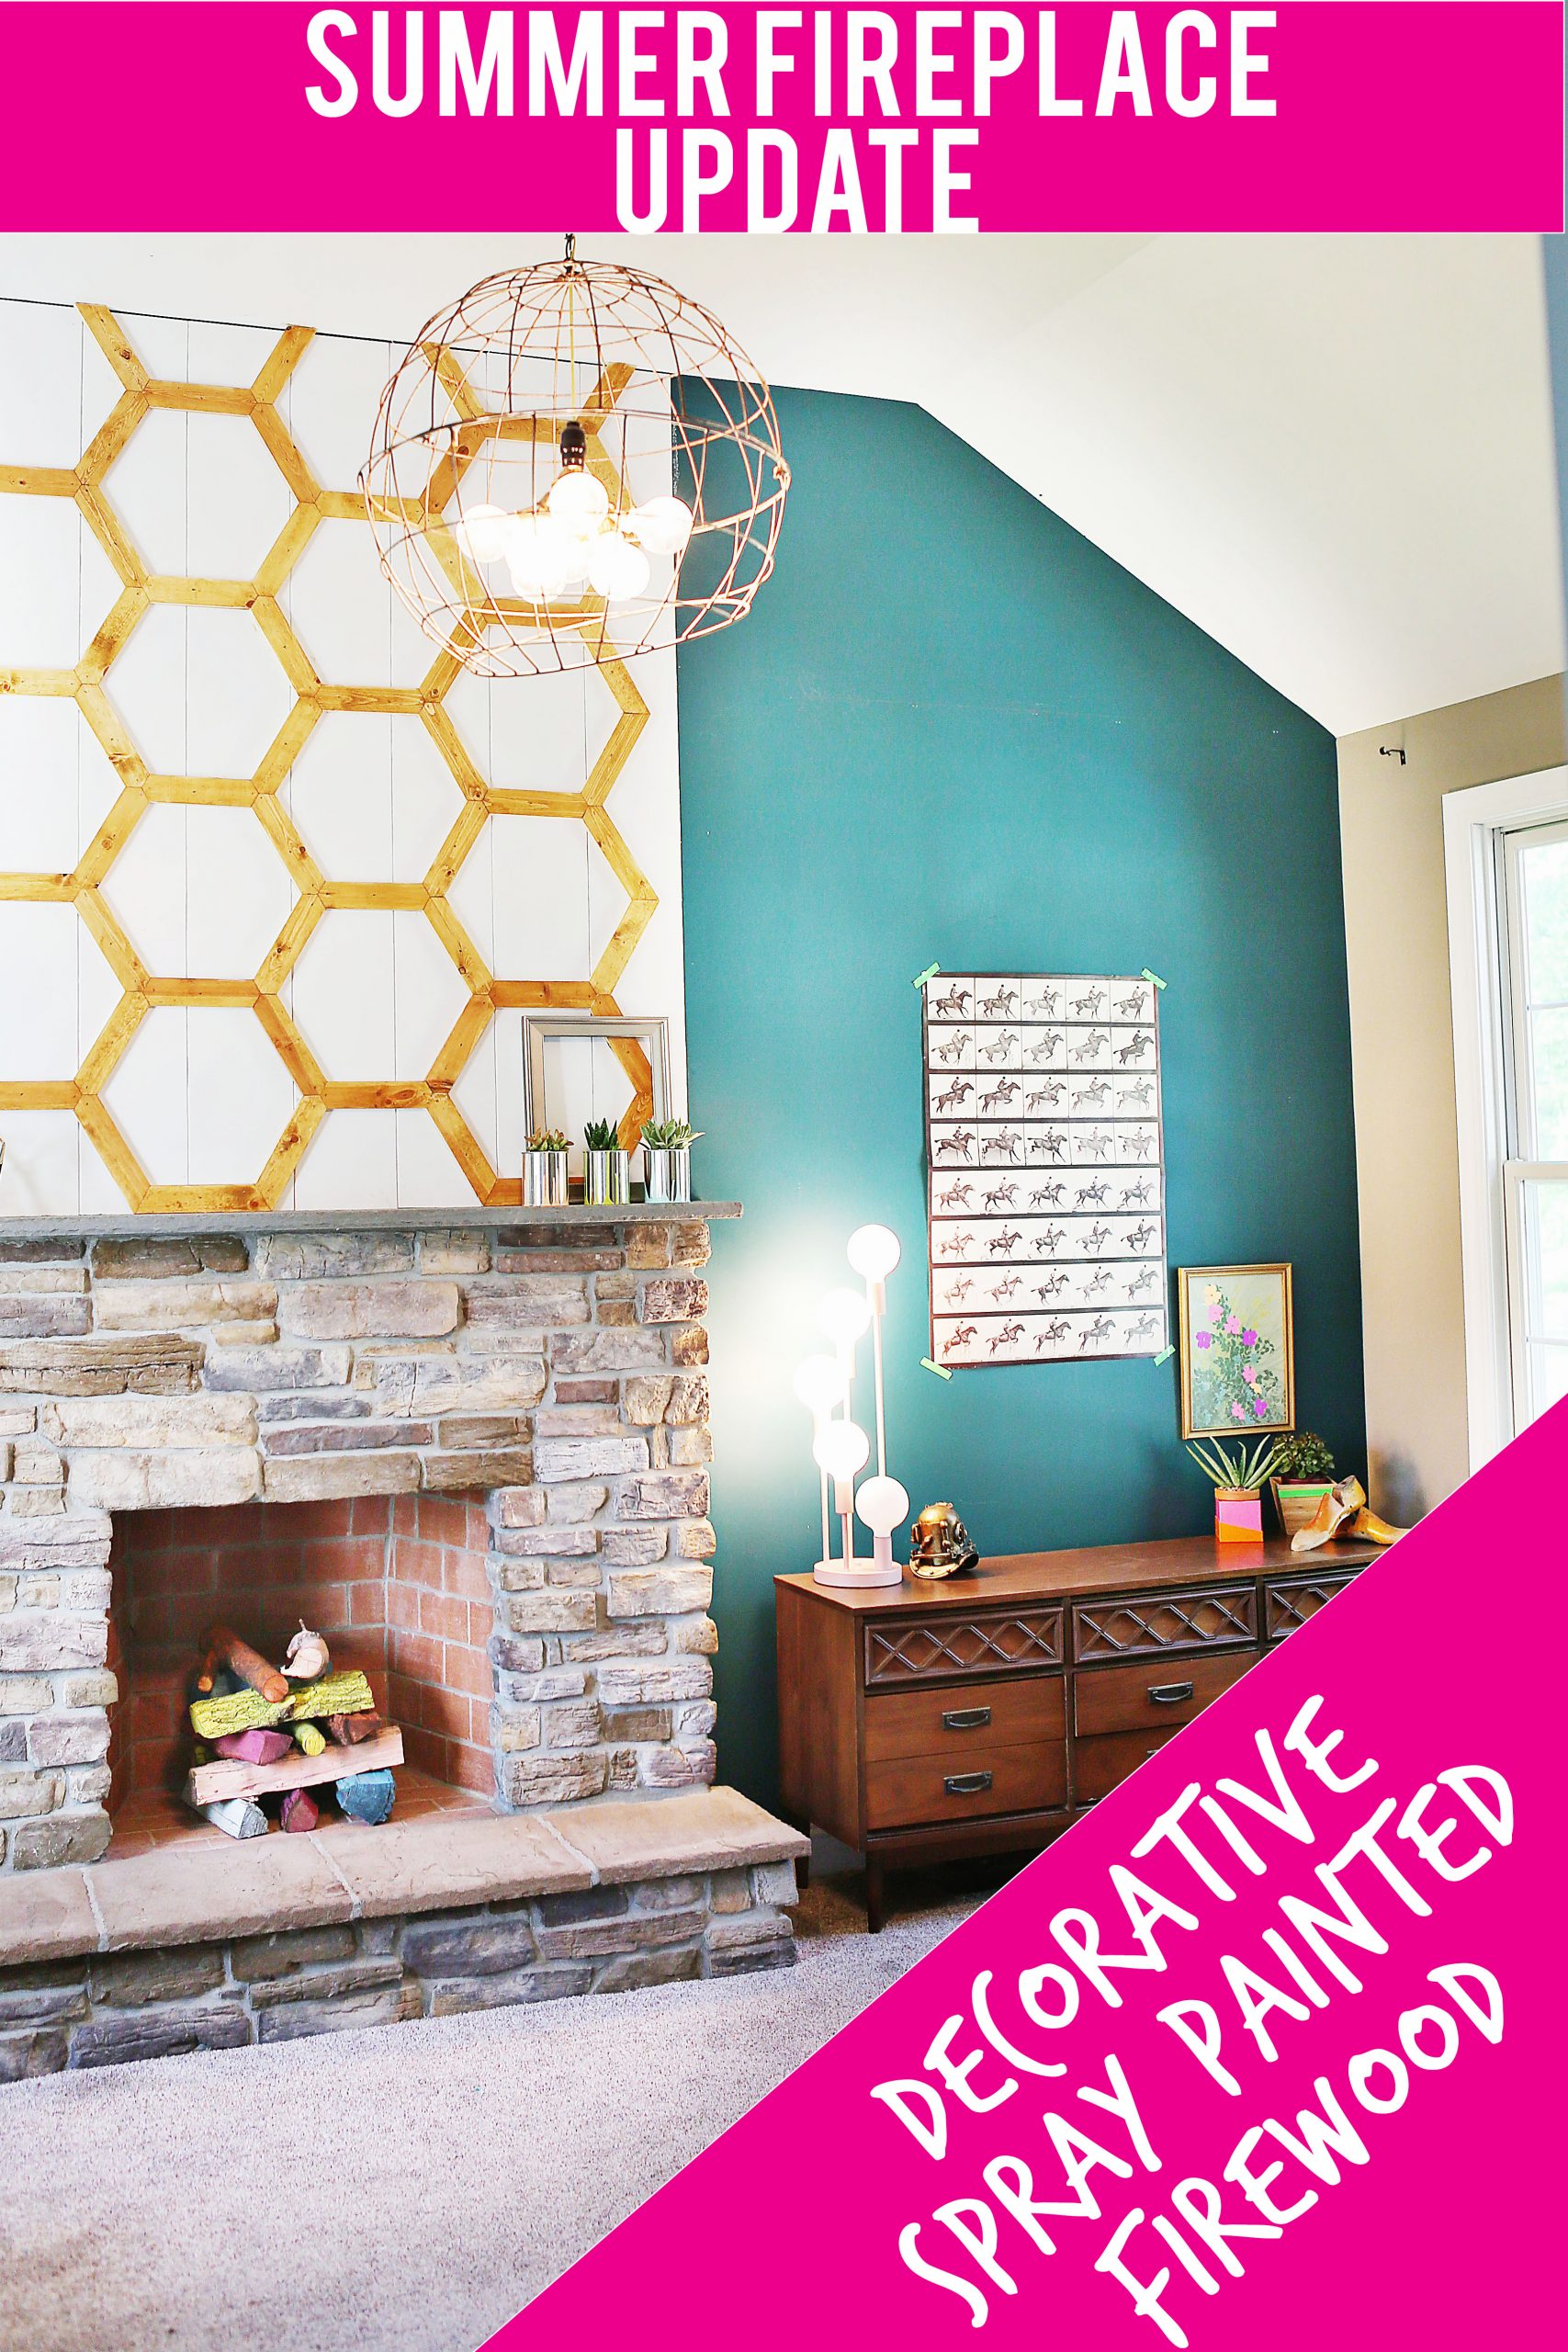 East Coast Fireplace Luxury Summer Fireplace Makeover with Diy Spray Painted Firewood